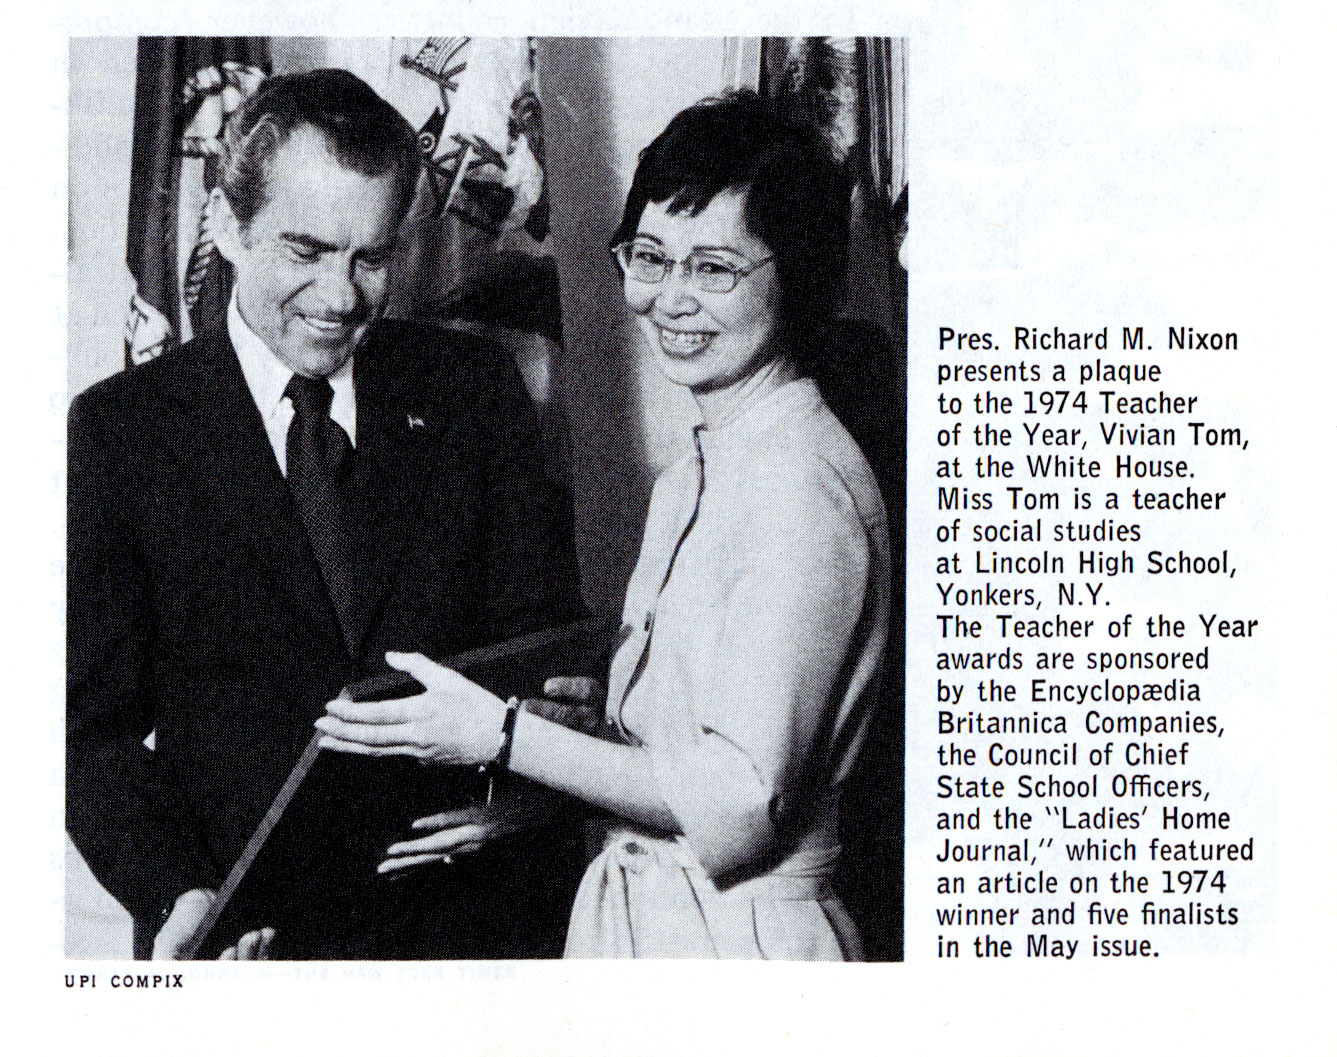 Photograph of Vivian Tom and President Richard Nixon, 1974 from Encyclopedia Britannica. Courtesy of John Danielson, Museum of Chinese in America (MOCA) Collection. 